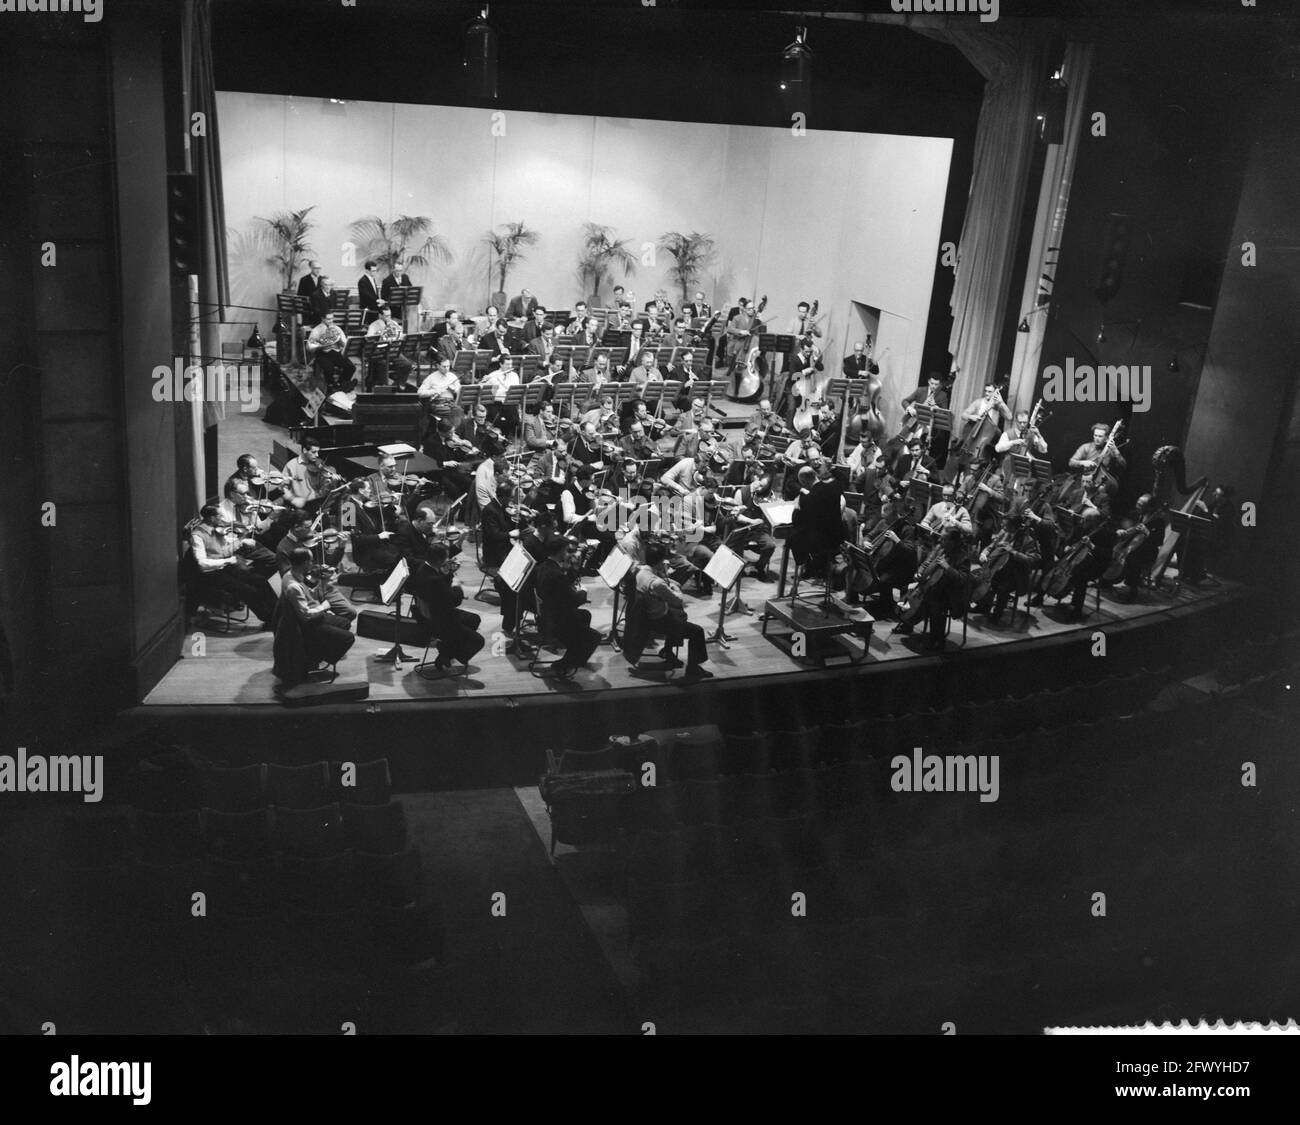 Rehearsal of the London Symphony Orchestra in Rotterdam, February 25, 1960, rehearsals, The Netherlands, 20th century press agency photo, news to remember, documentary, historic photography 1945-1990, visual stories, human history of the Twentieth Century, capturing moments in time Stock Photo